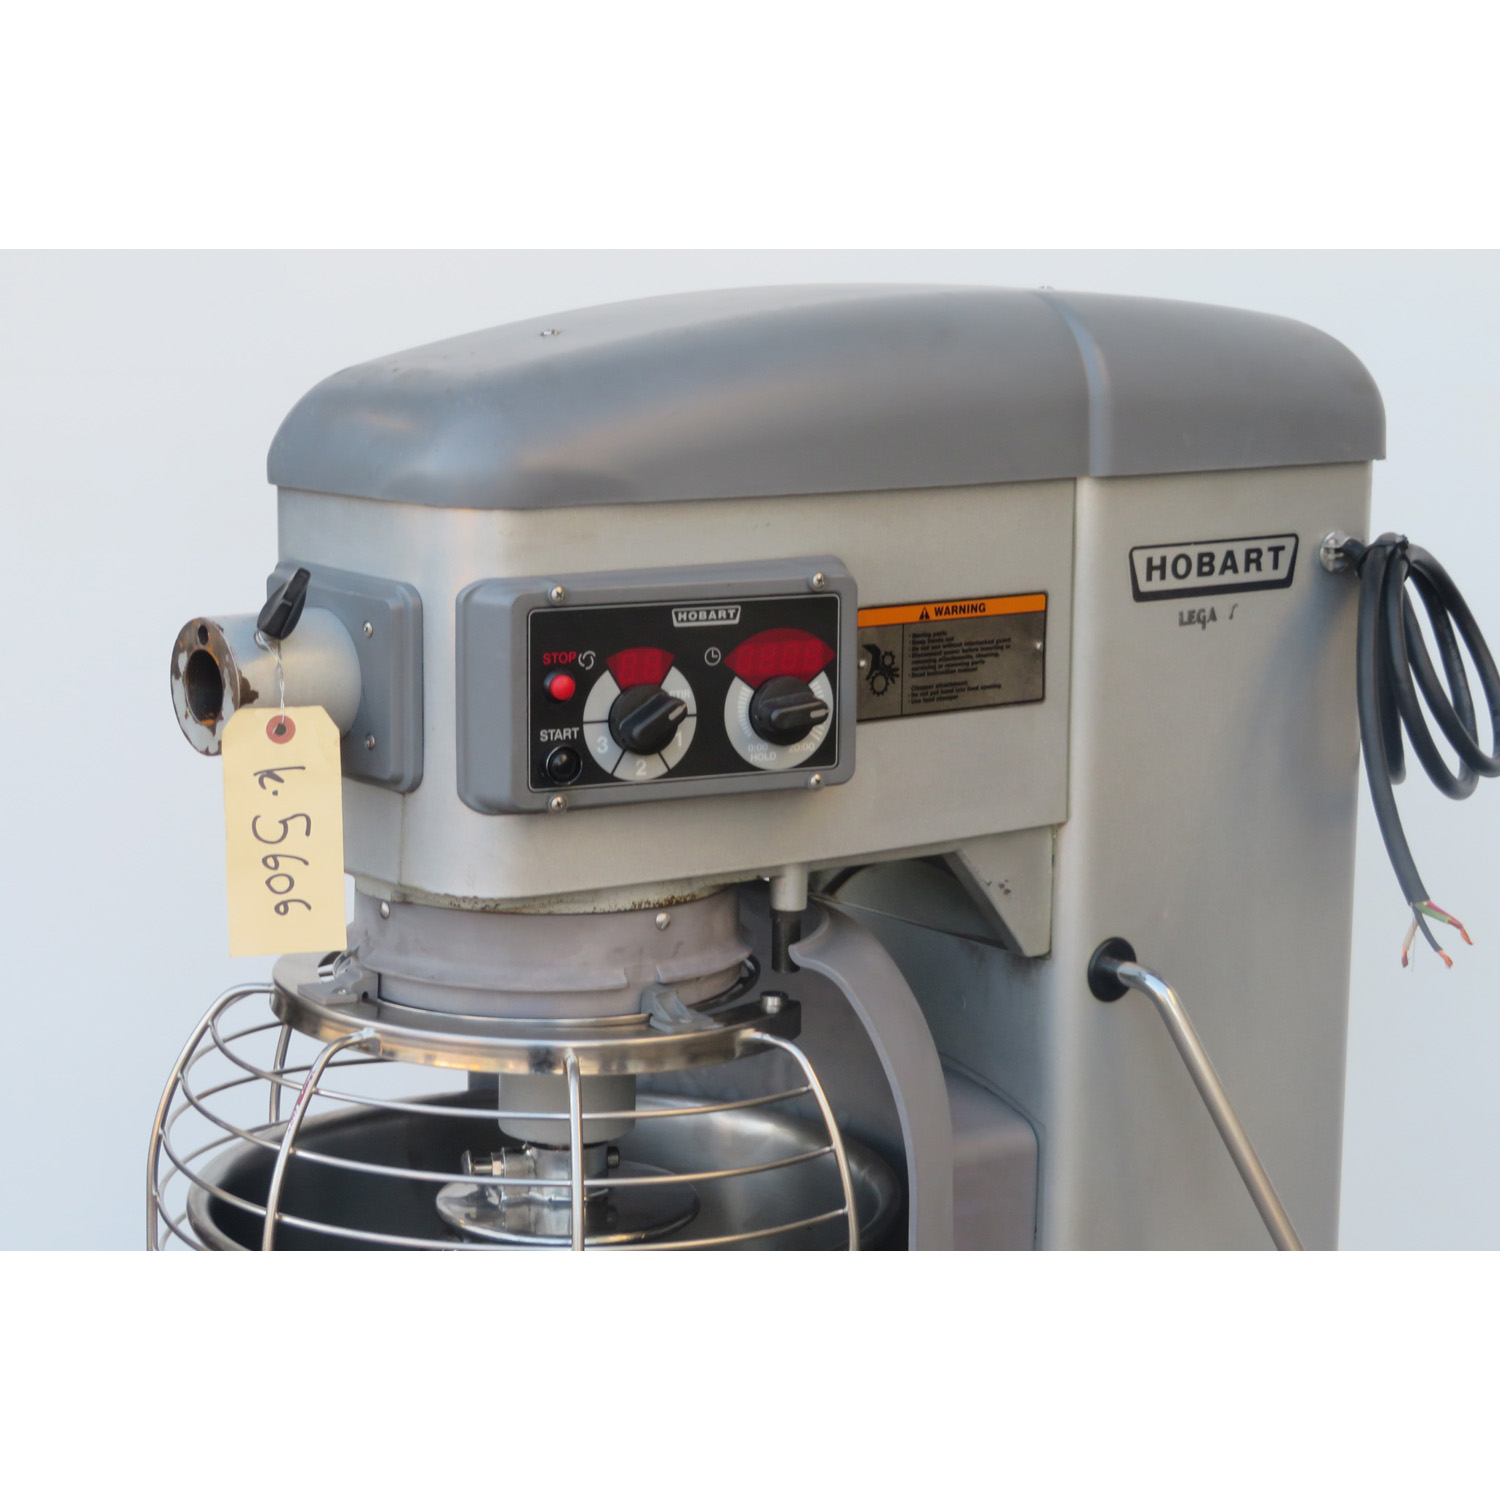 Hobart 40 Quart HL400 Mixer, Used Great Condition image 1